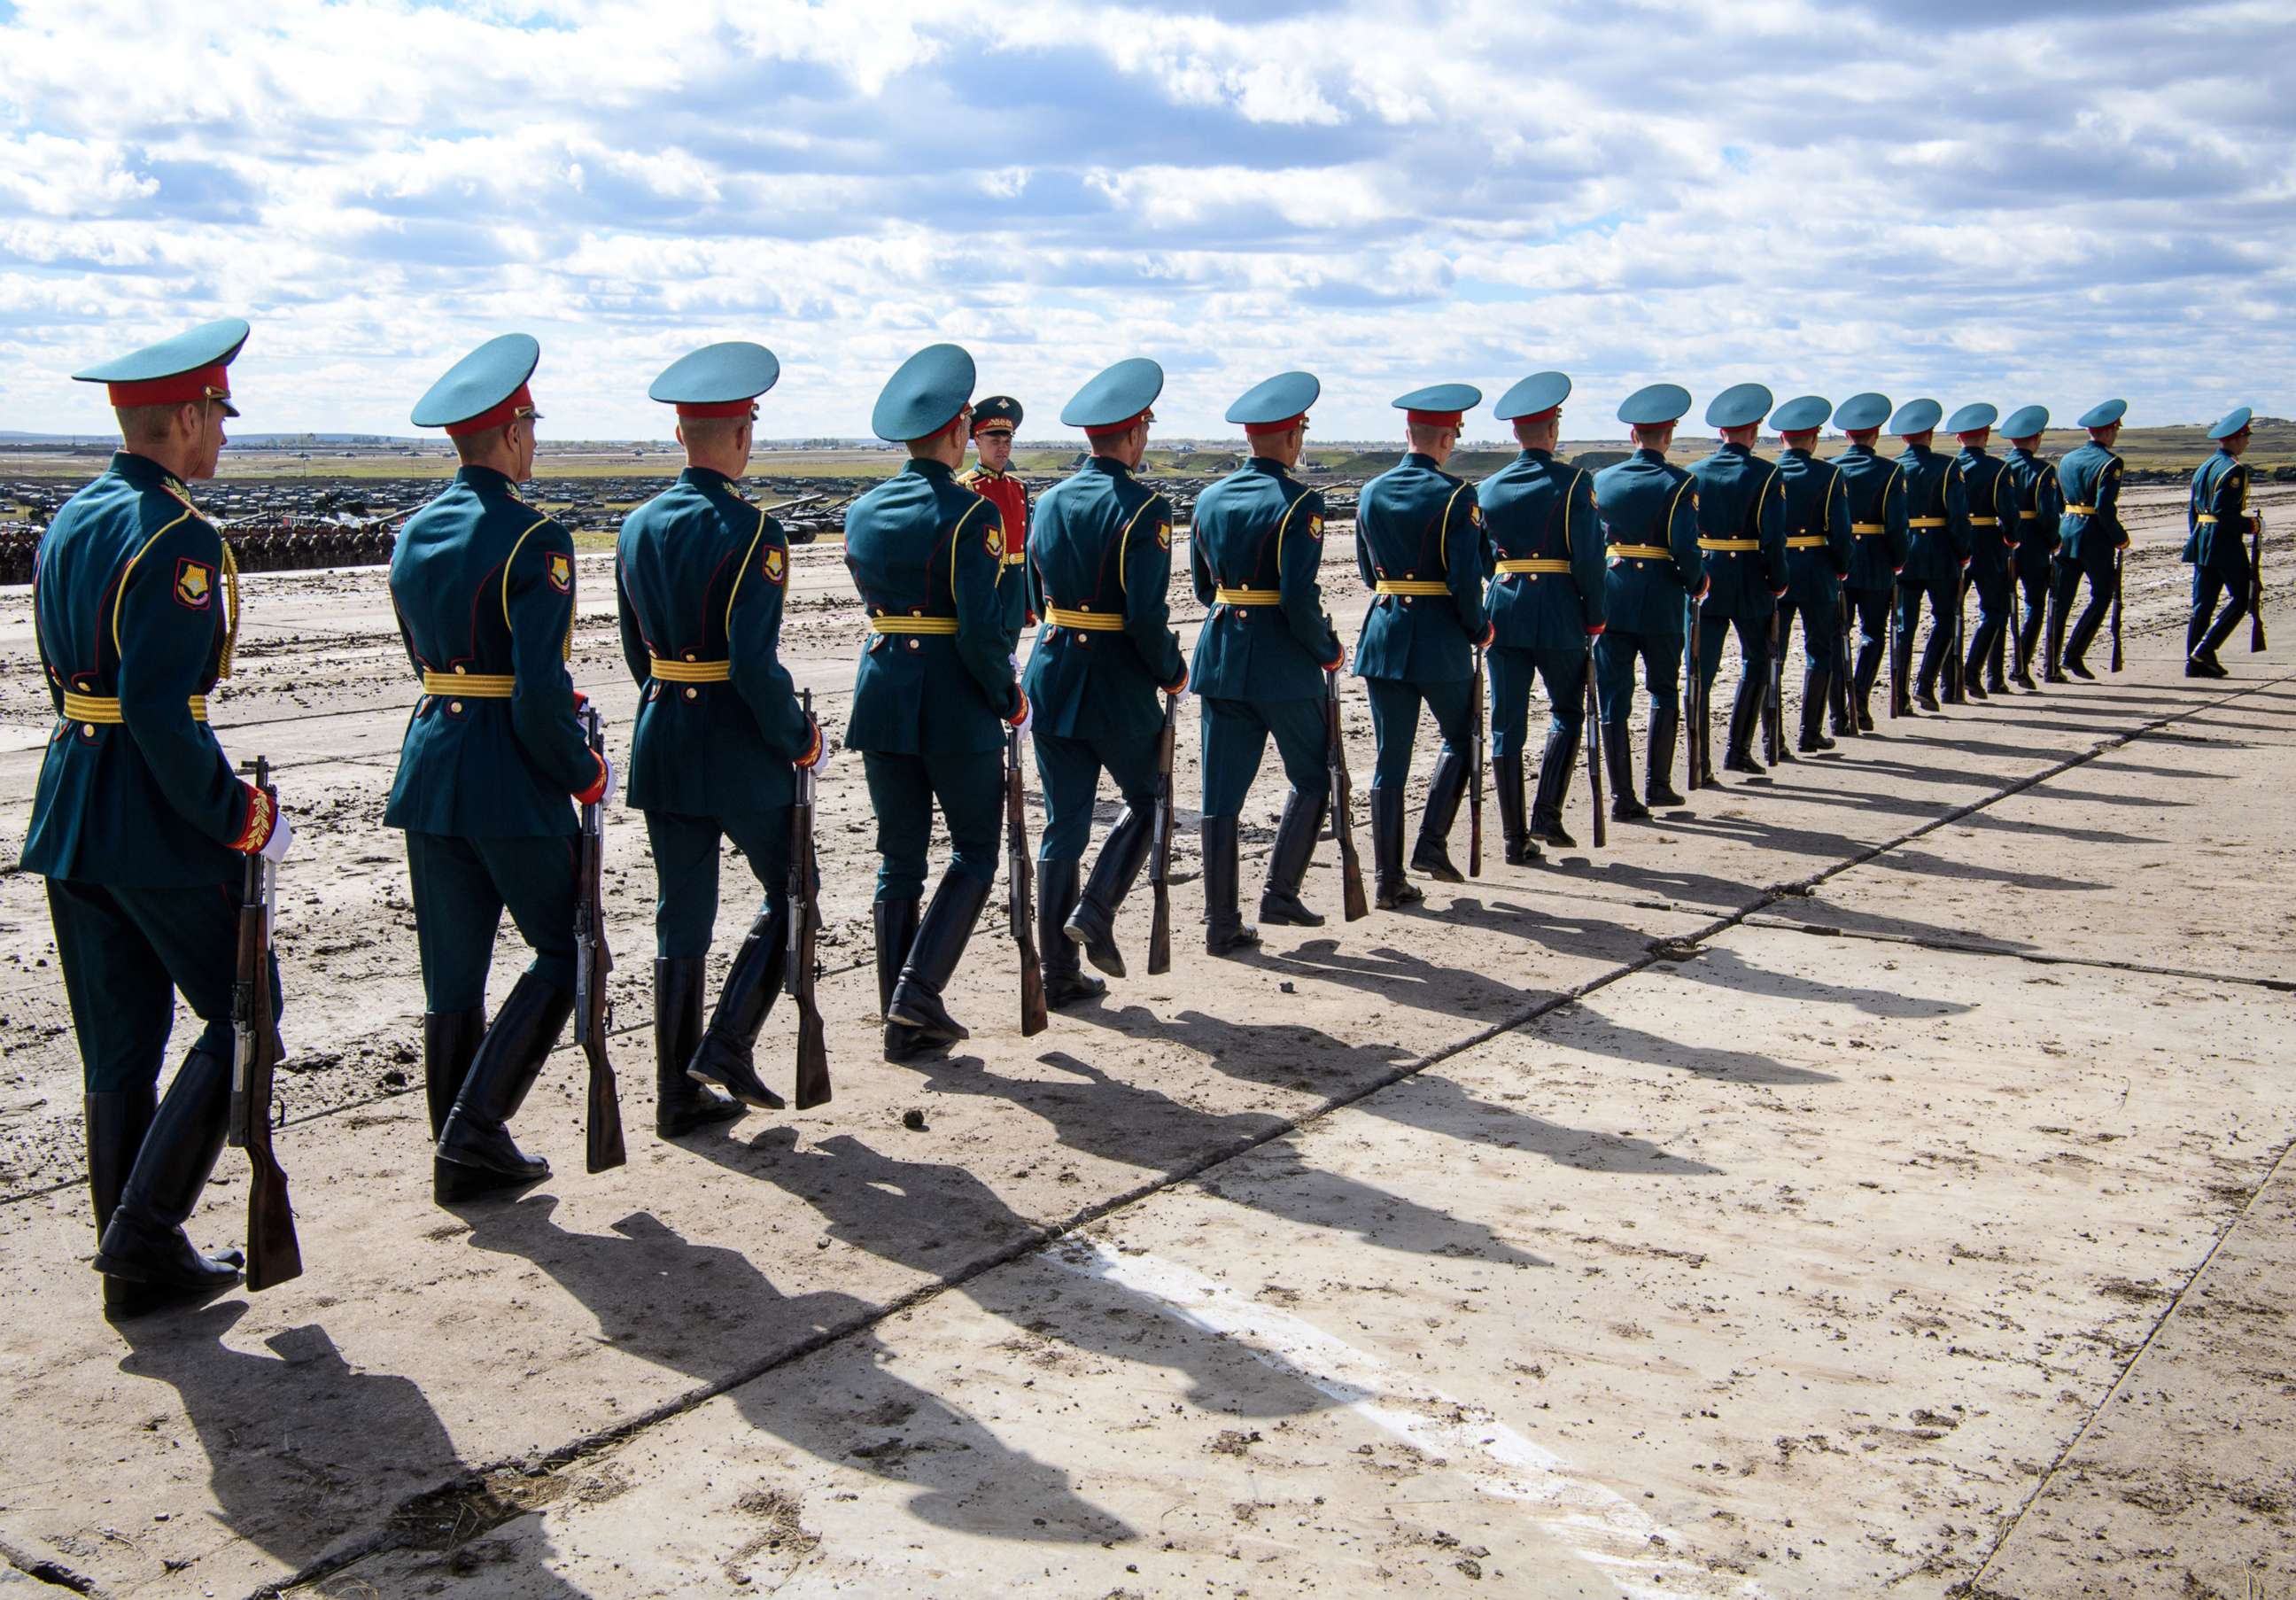 PHOTO: Russian honor guards are seen during the Vostok-2018 military drills at Tsugol training ground not far from the borders with China and Mongolia in Siberia, Sept. 13, 2018.